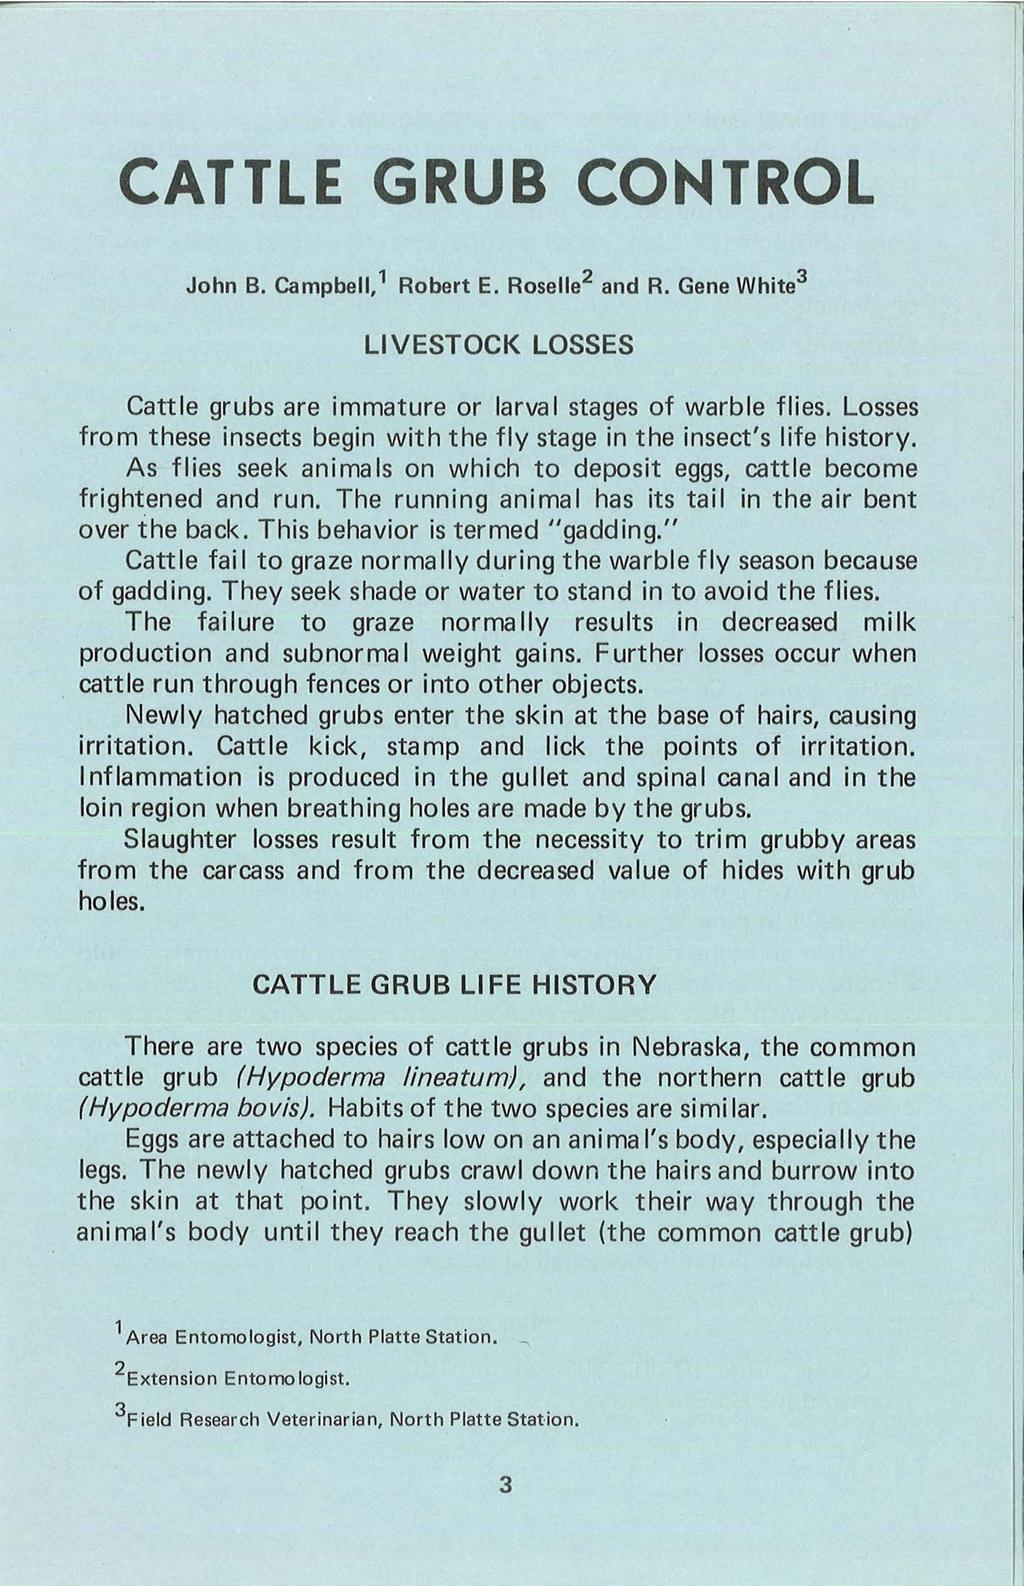 CATTLE GRUB CONTROL John B. Campbell, 1 Robert E. Roselle 2 and R. Gene White 3 LIVESTOCK LOSSES Cattle grubs are immature or larval stages of warble flies.